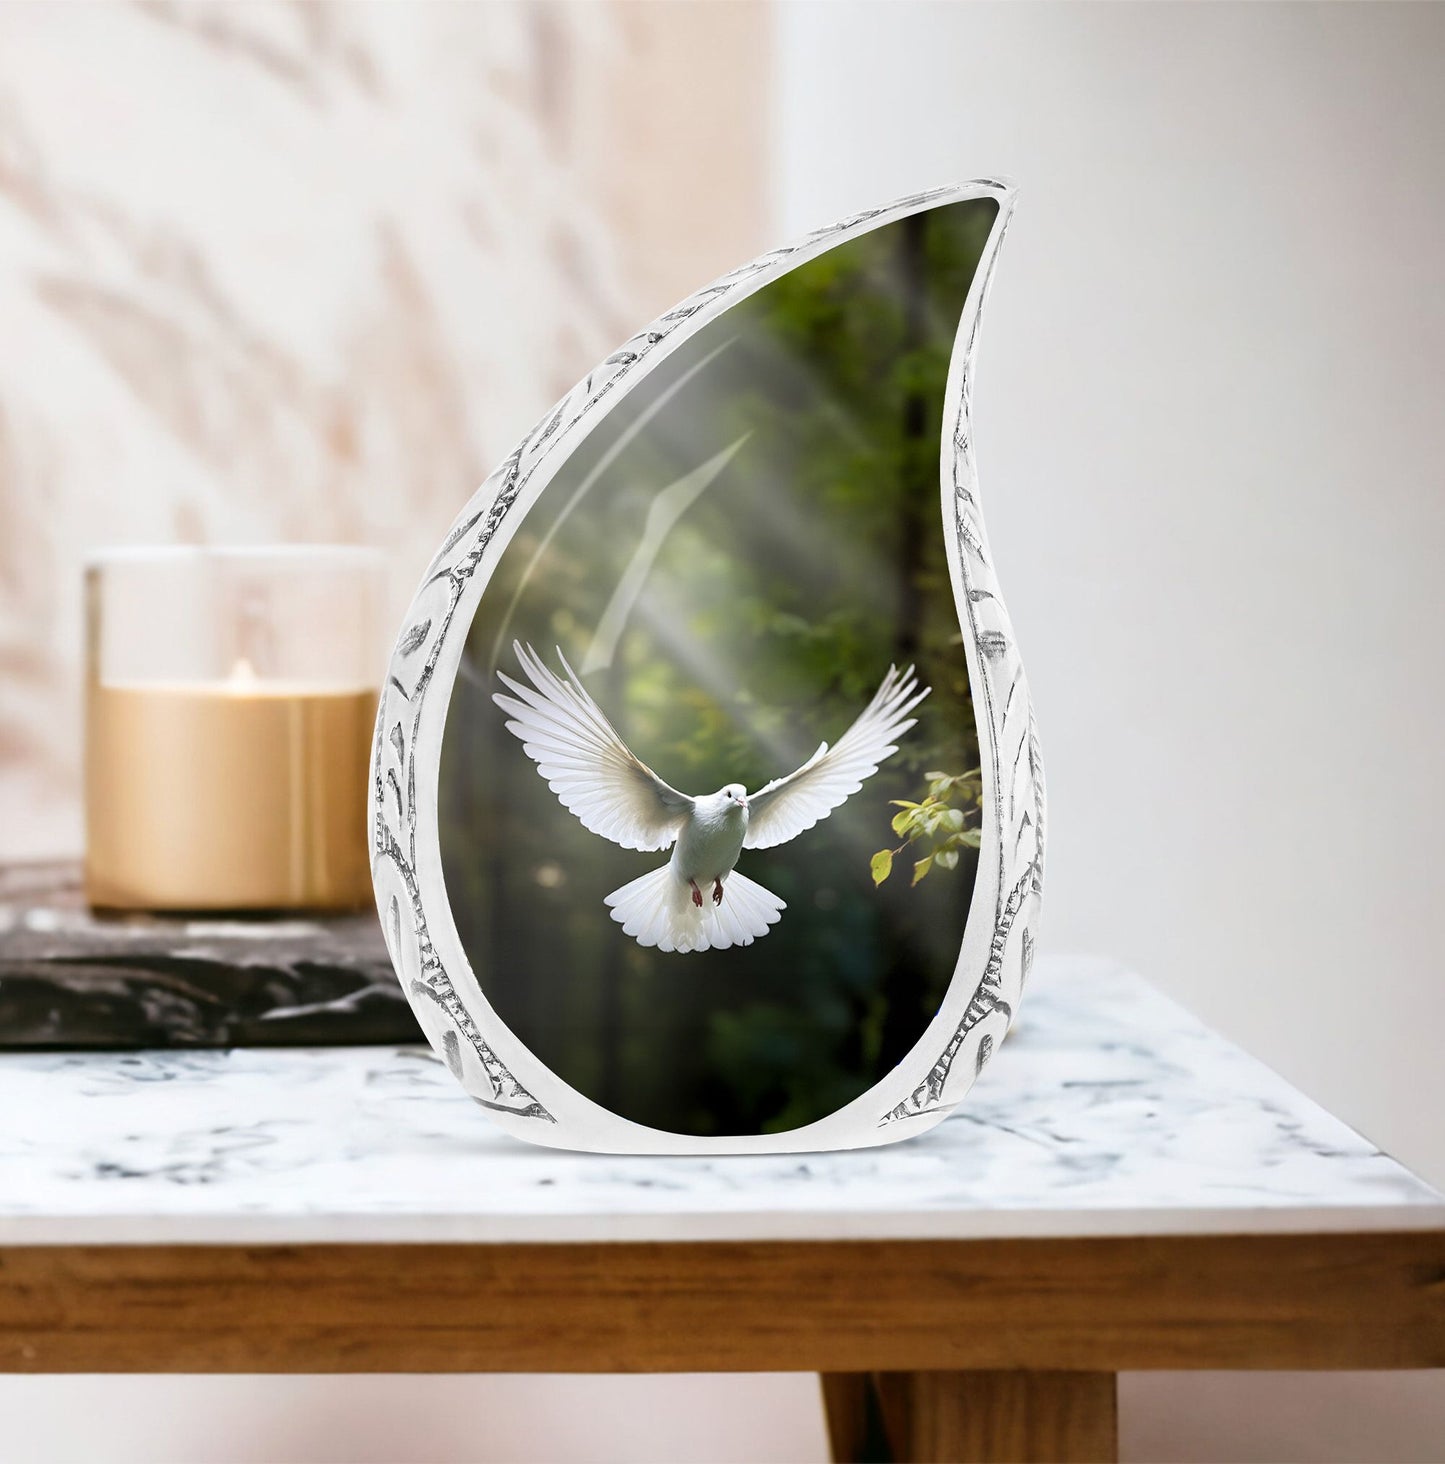 Large Dove-themed cremation urn with peaceful dove design against a dark background, perfect for adult human ashes